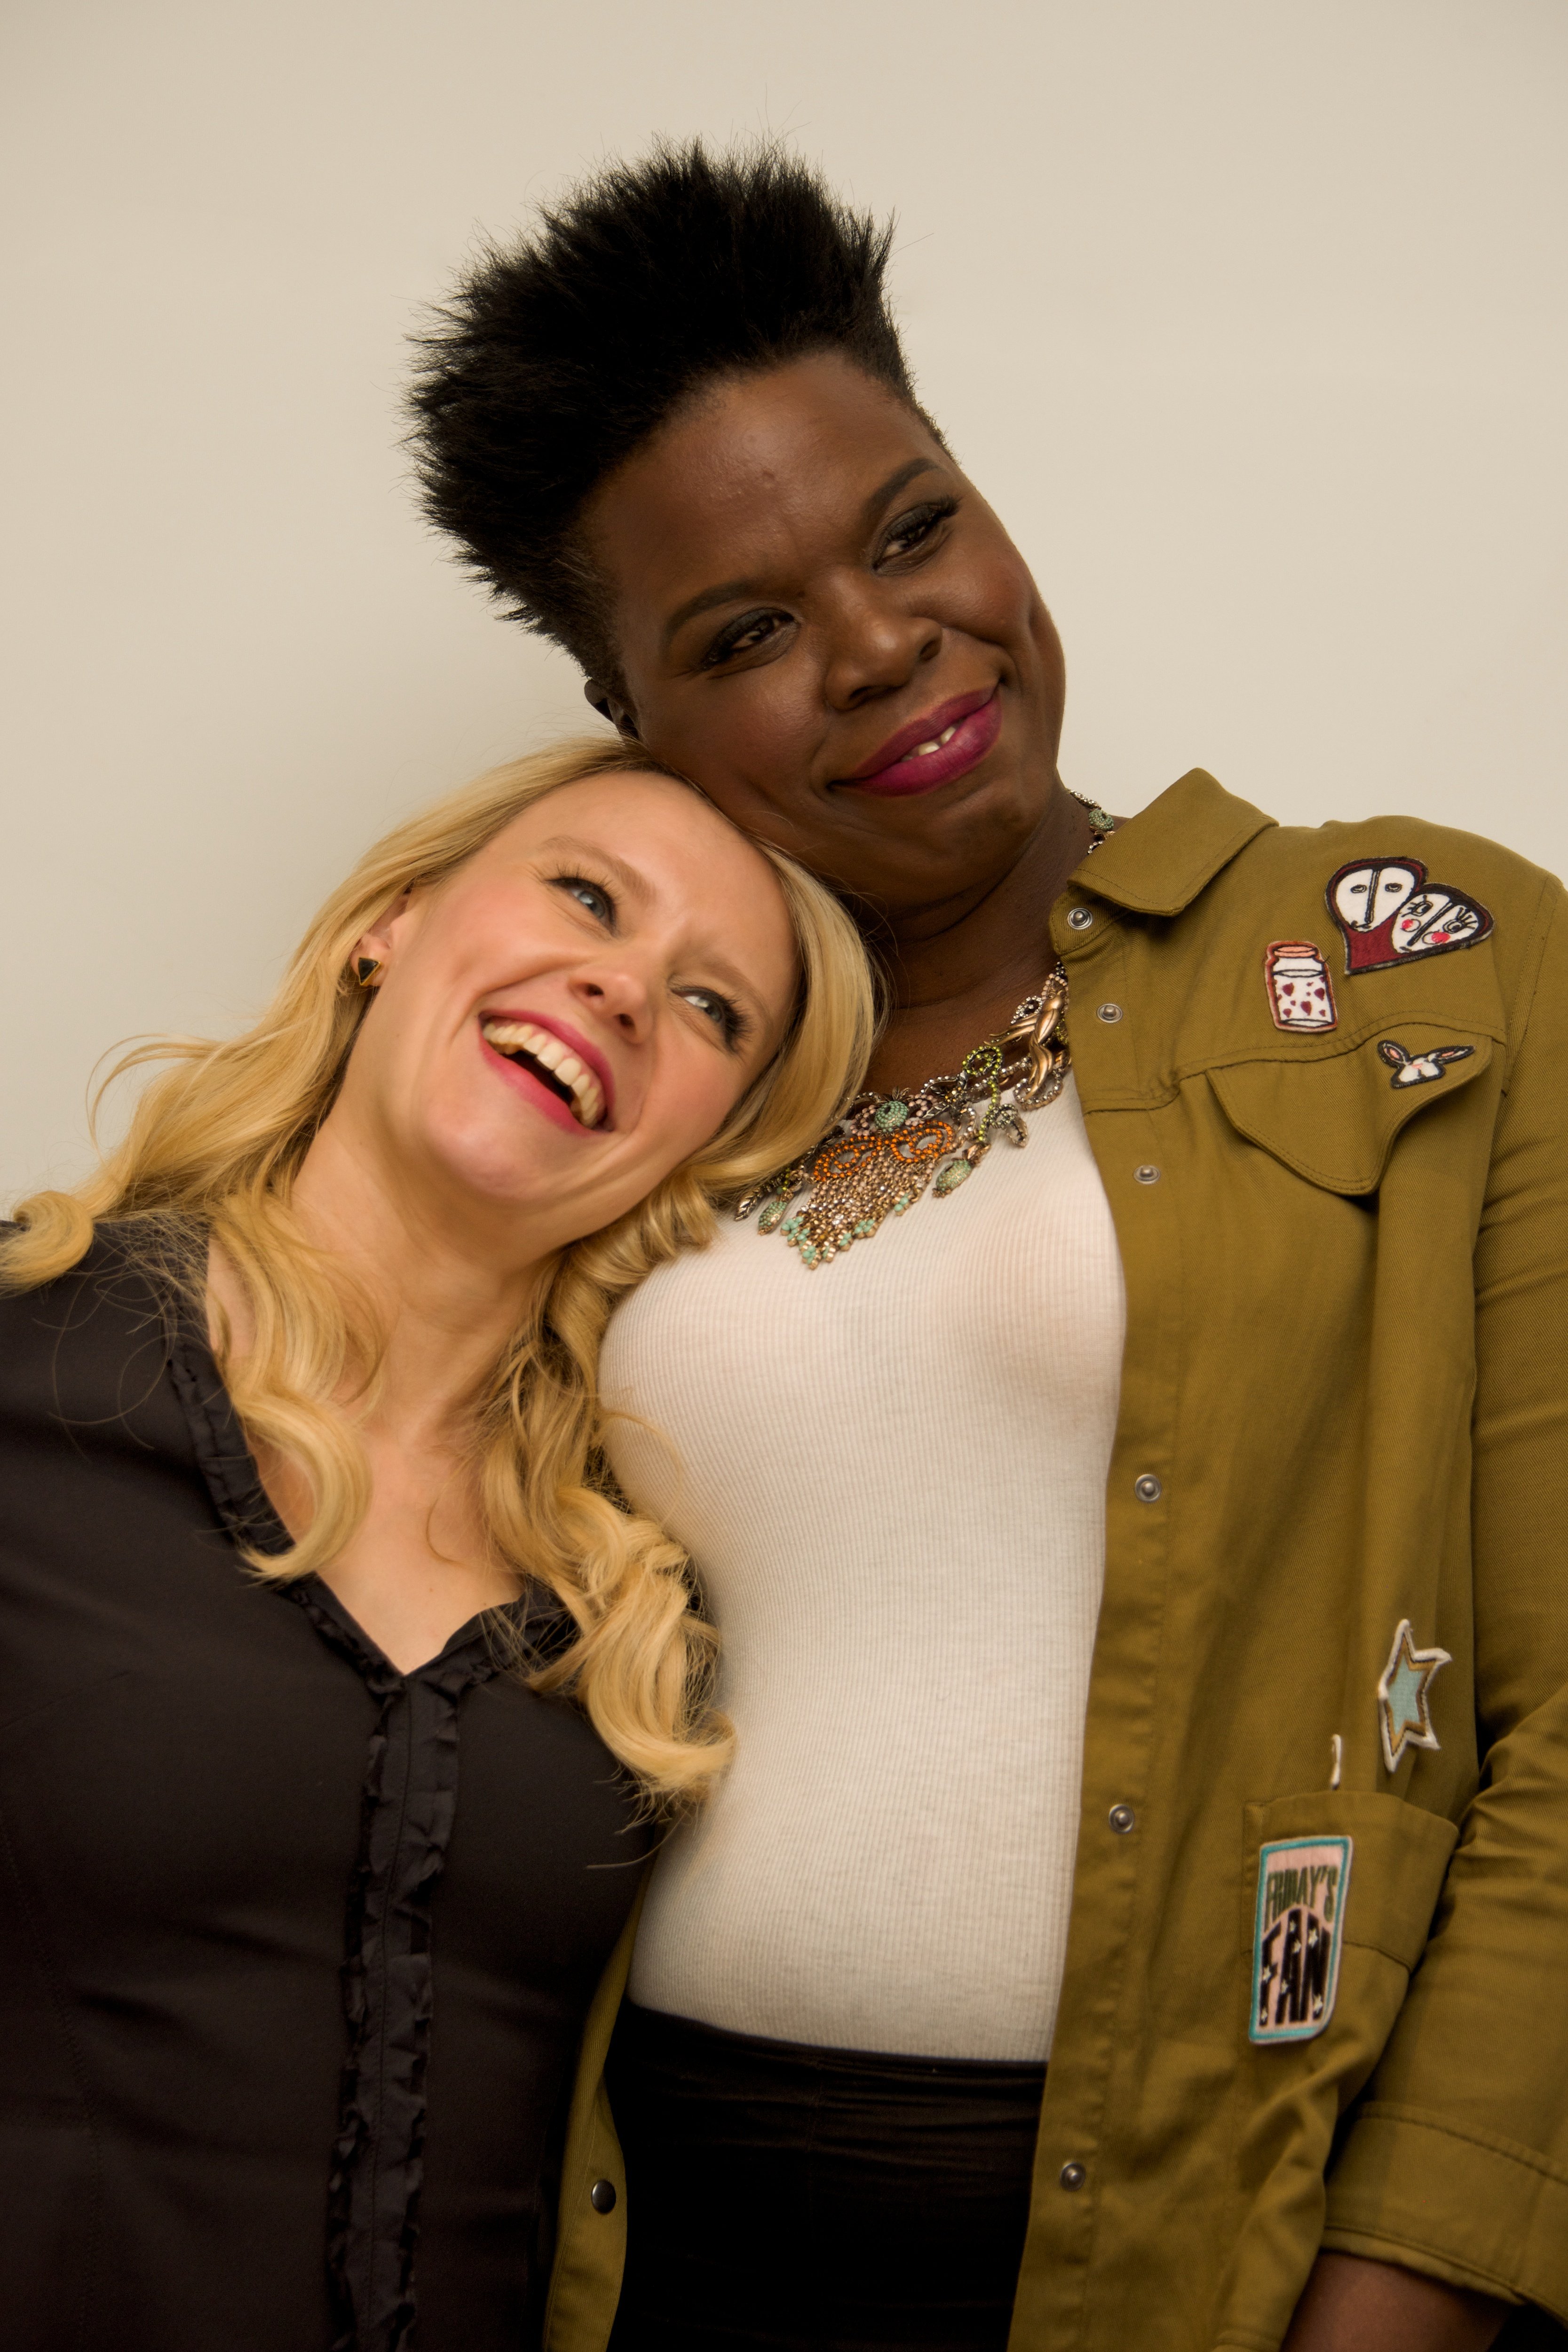 Comedians Kate McKinnon and Leslie Jones at the "Ghostbusters" Press Conference hosted at Four Seasons Hotel in Beverly Hills, CA, on July 8, 2016. | Source: Getty Images